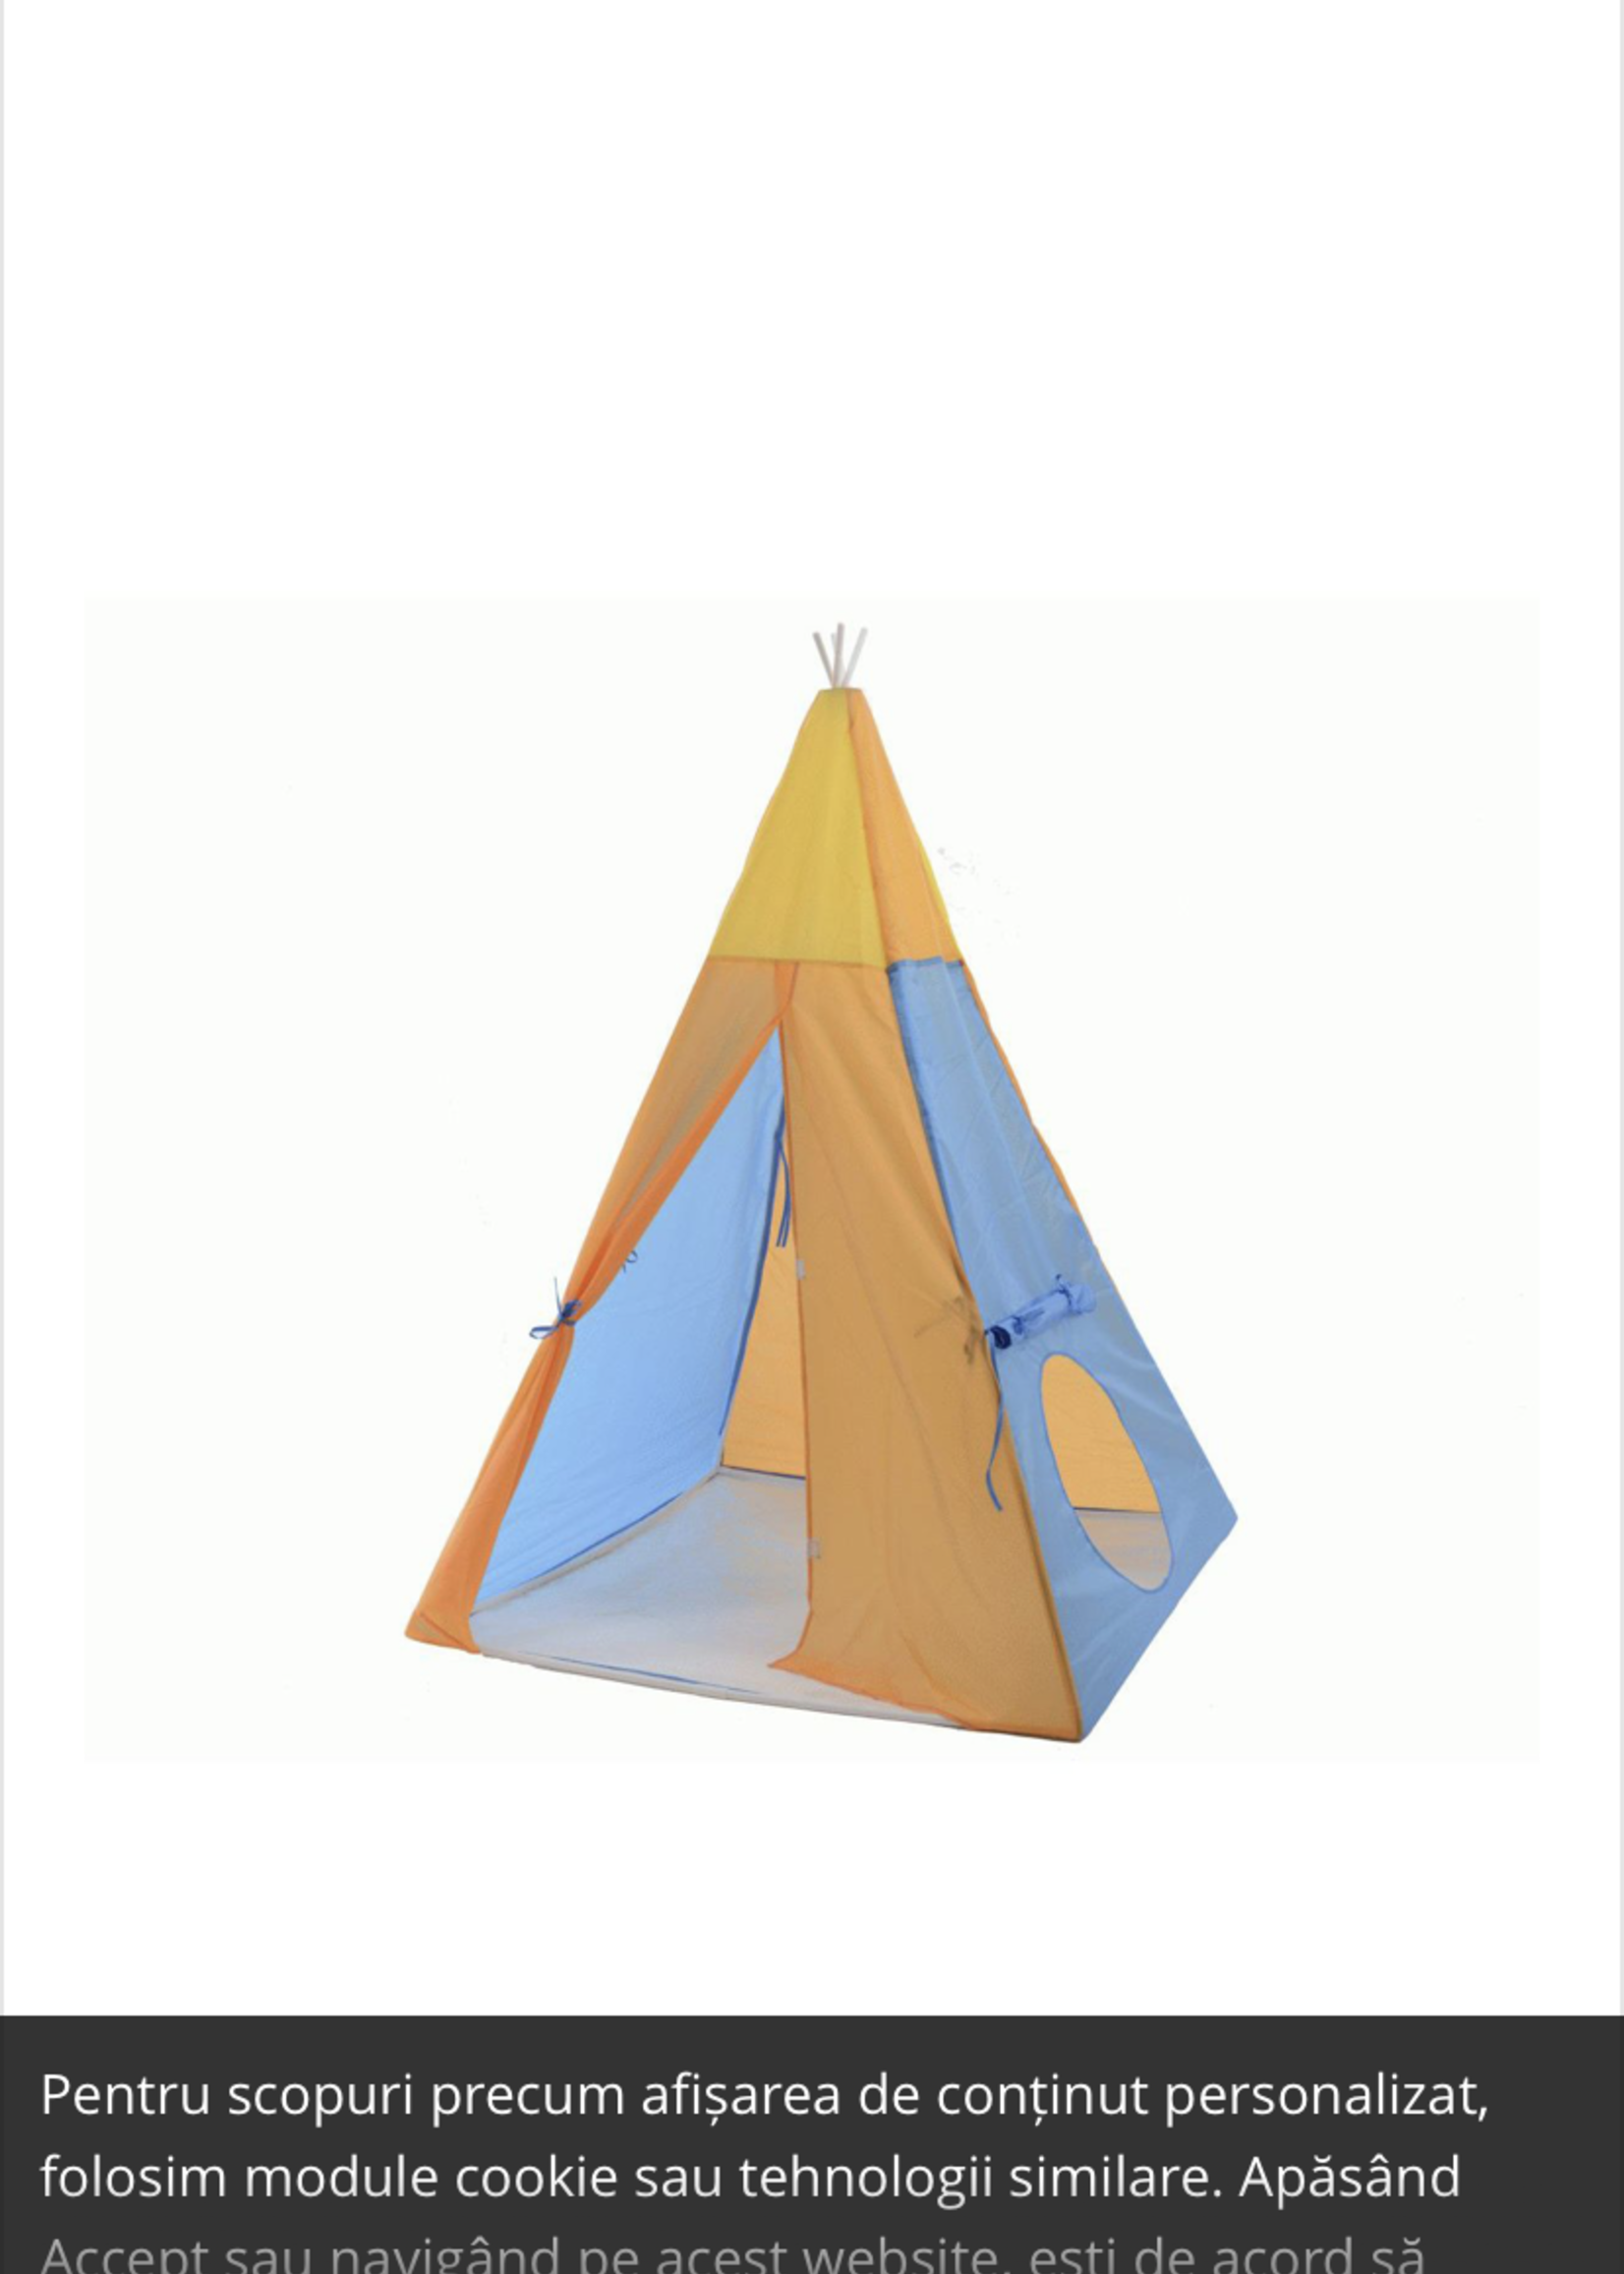 Teepee, play tent/shelter